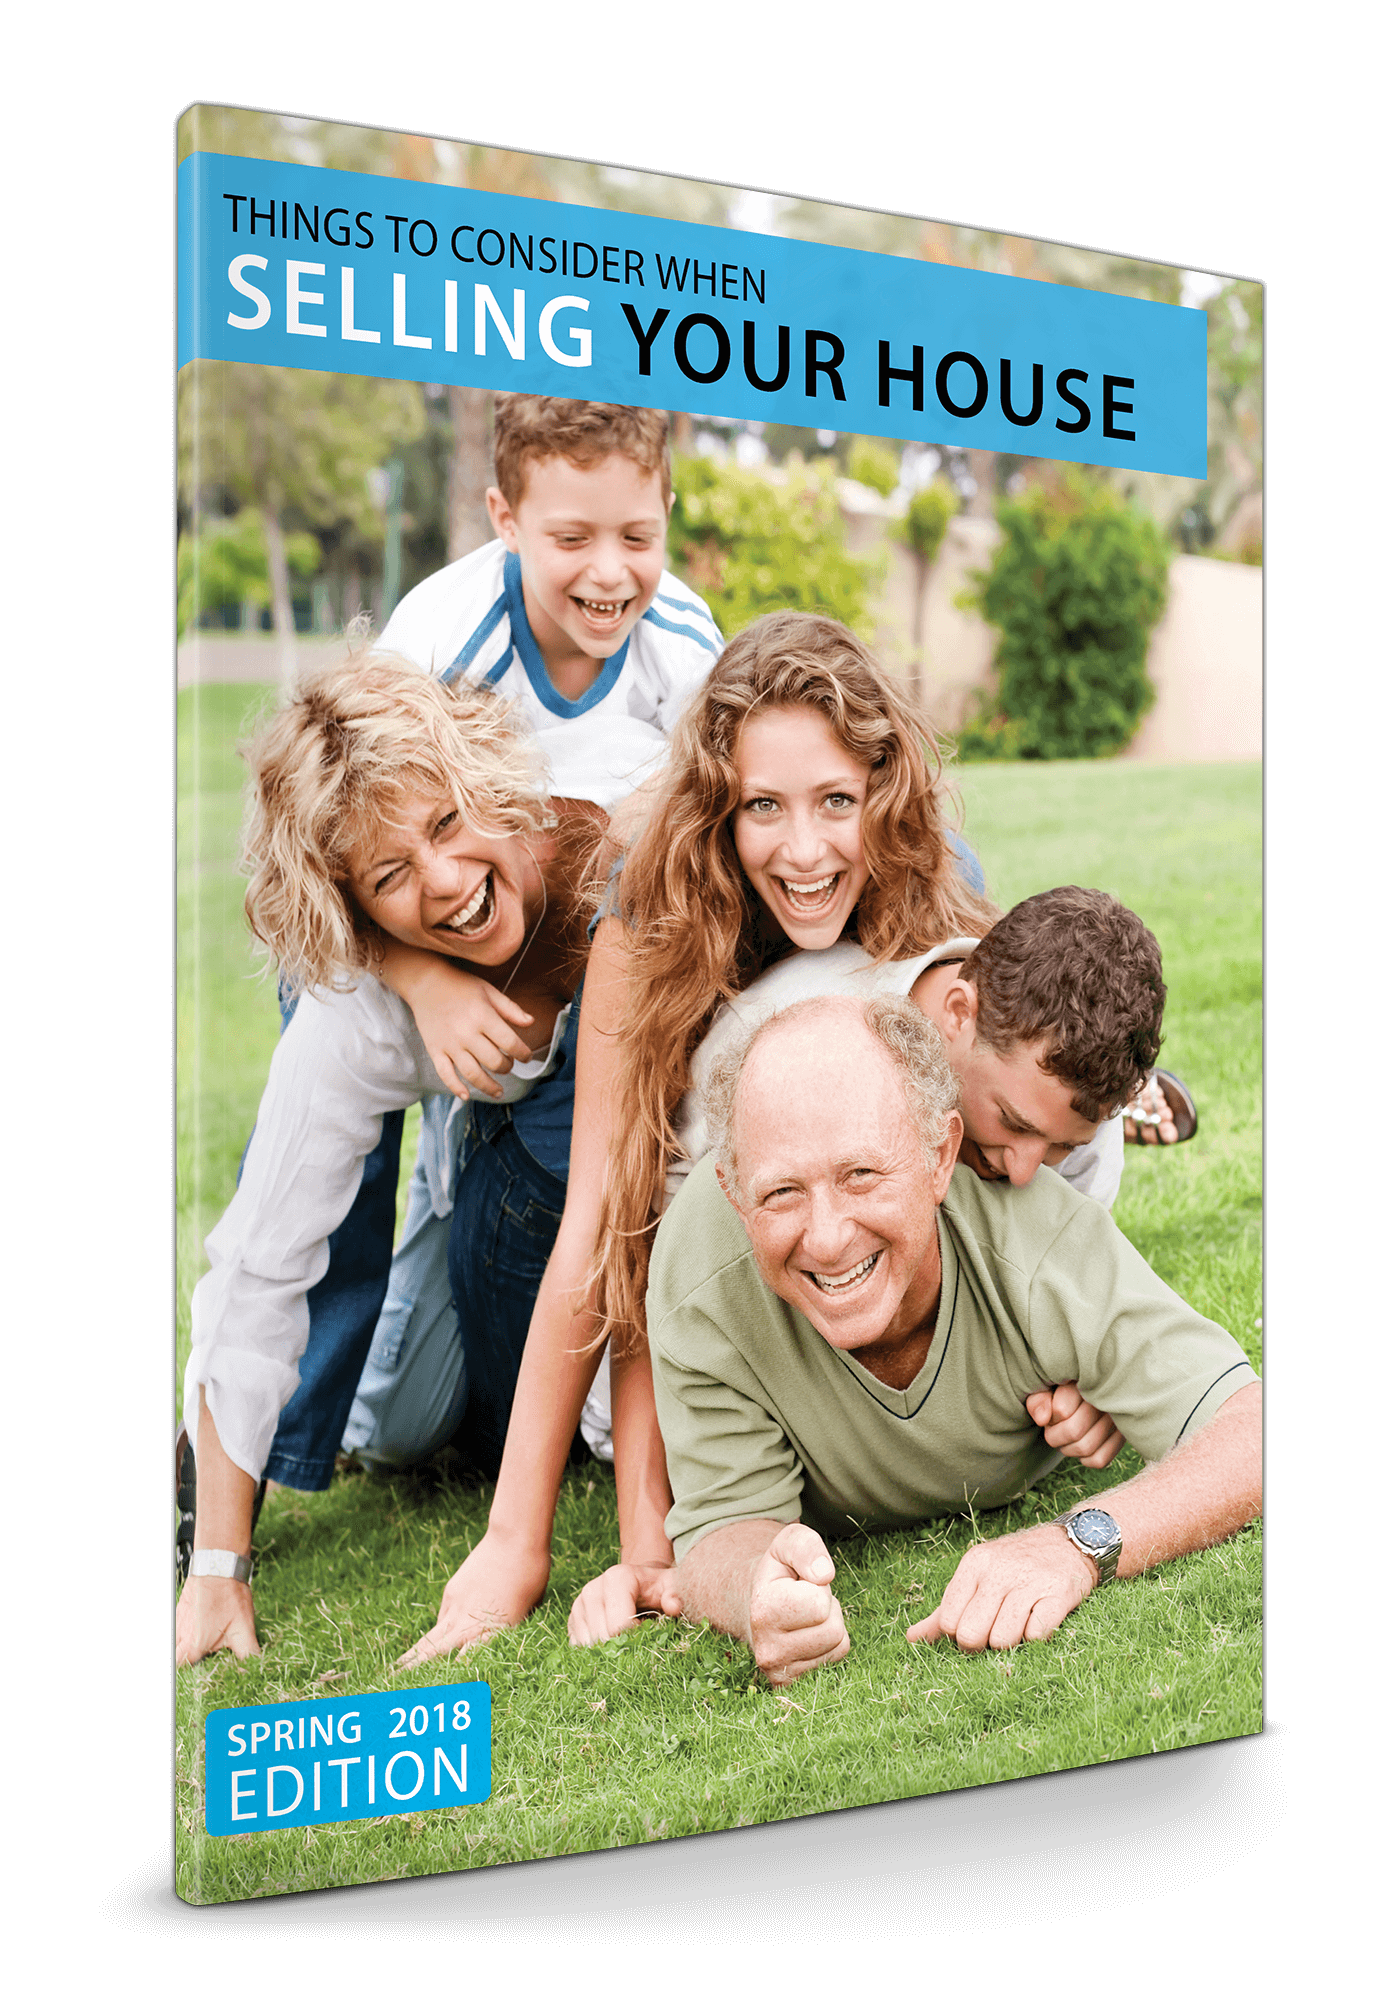 existing-home-sales-on-the-rise-utah-realty